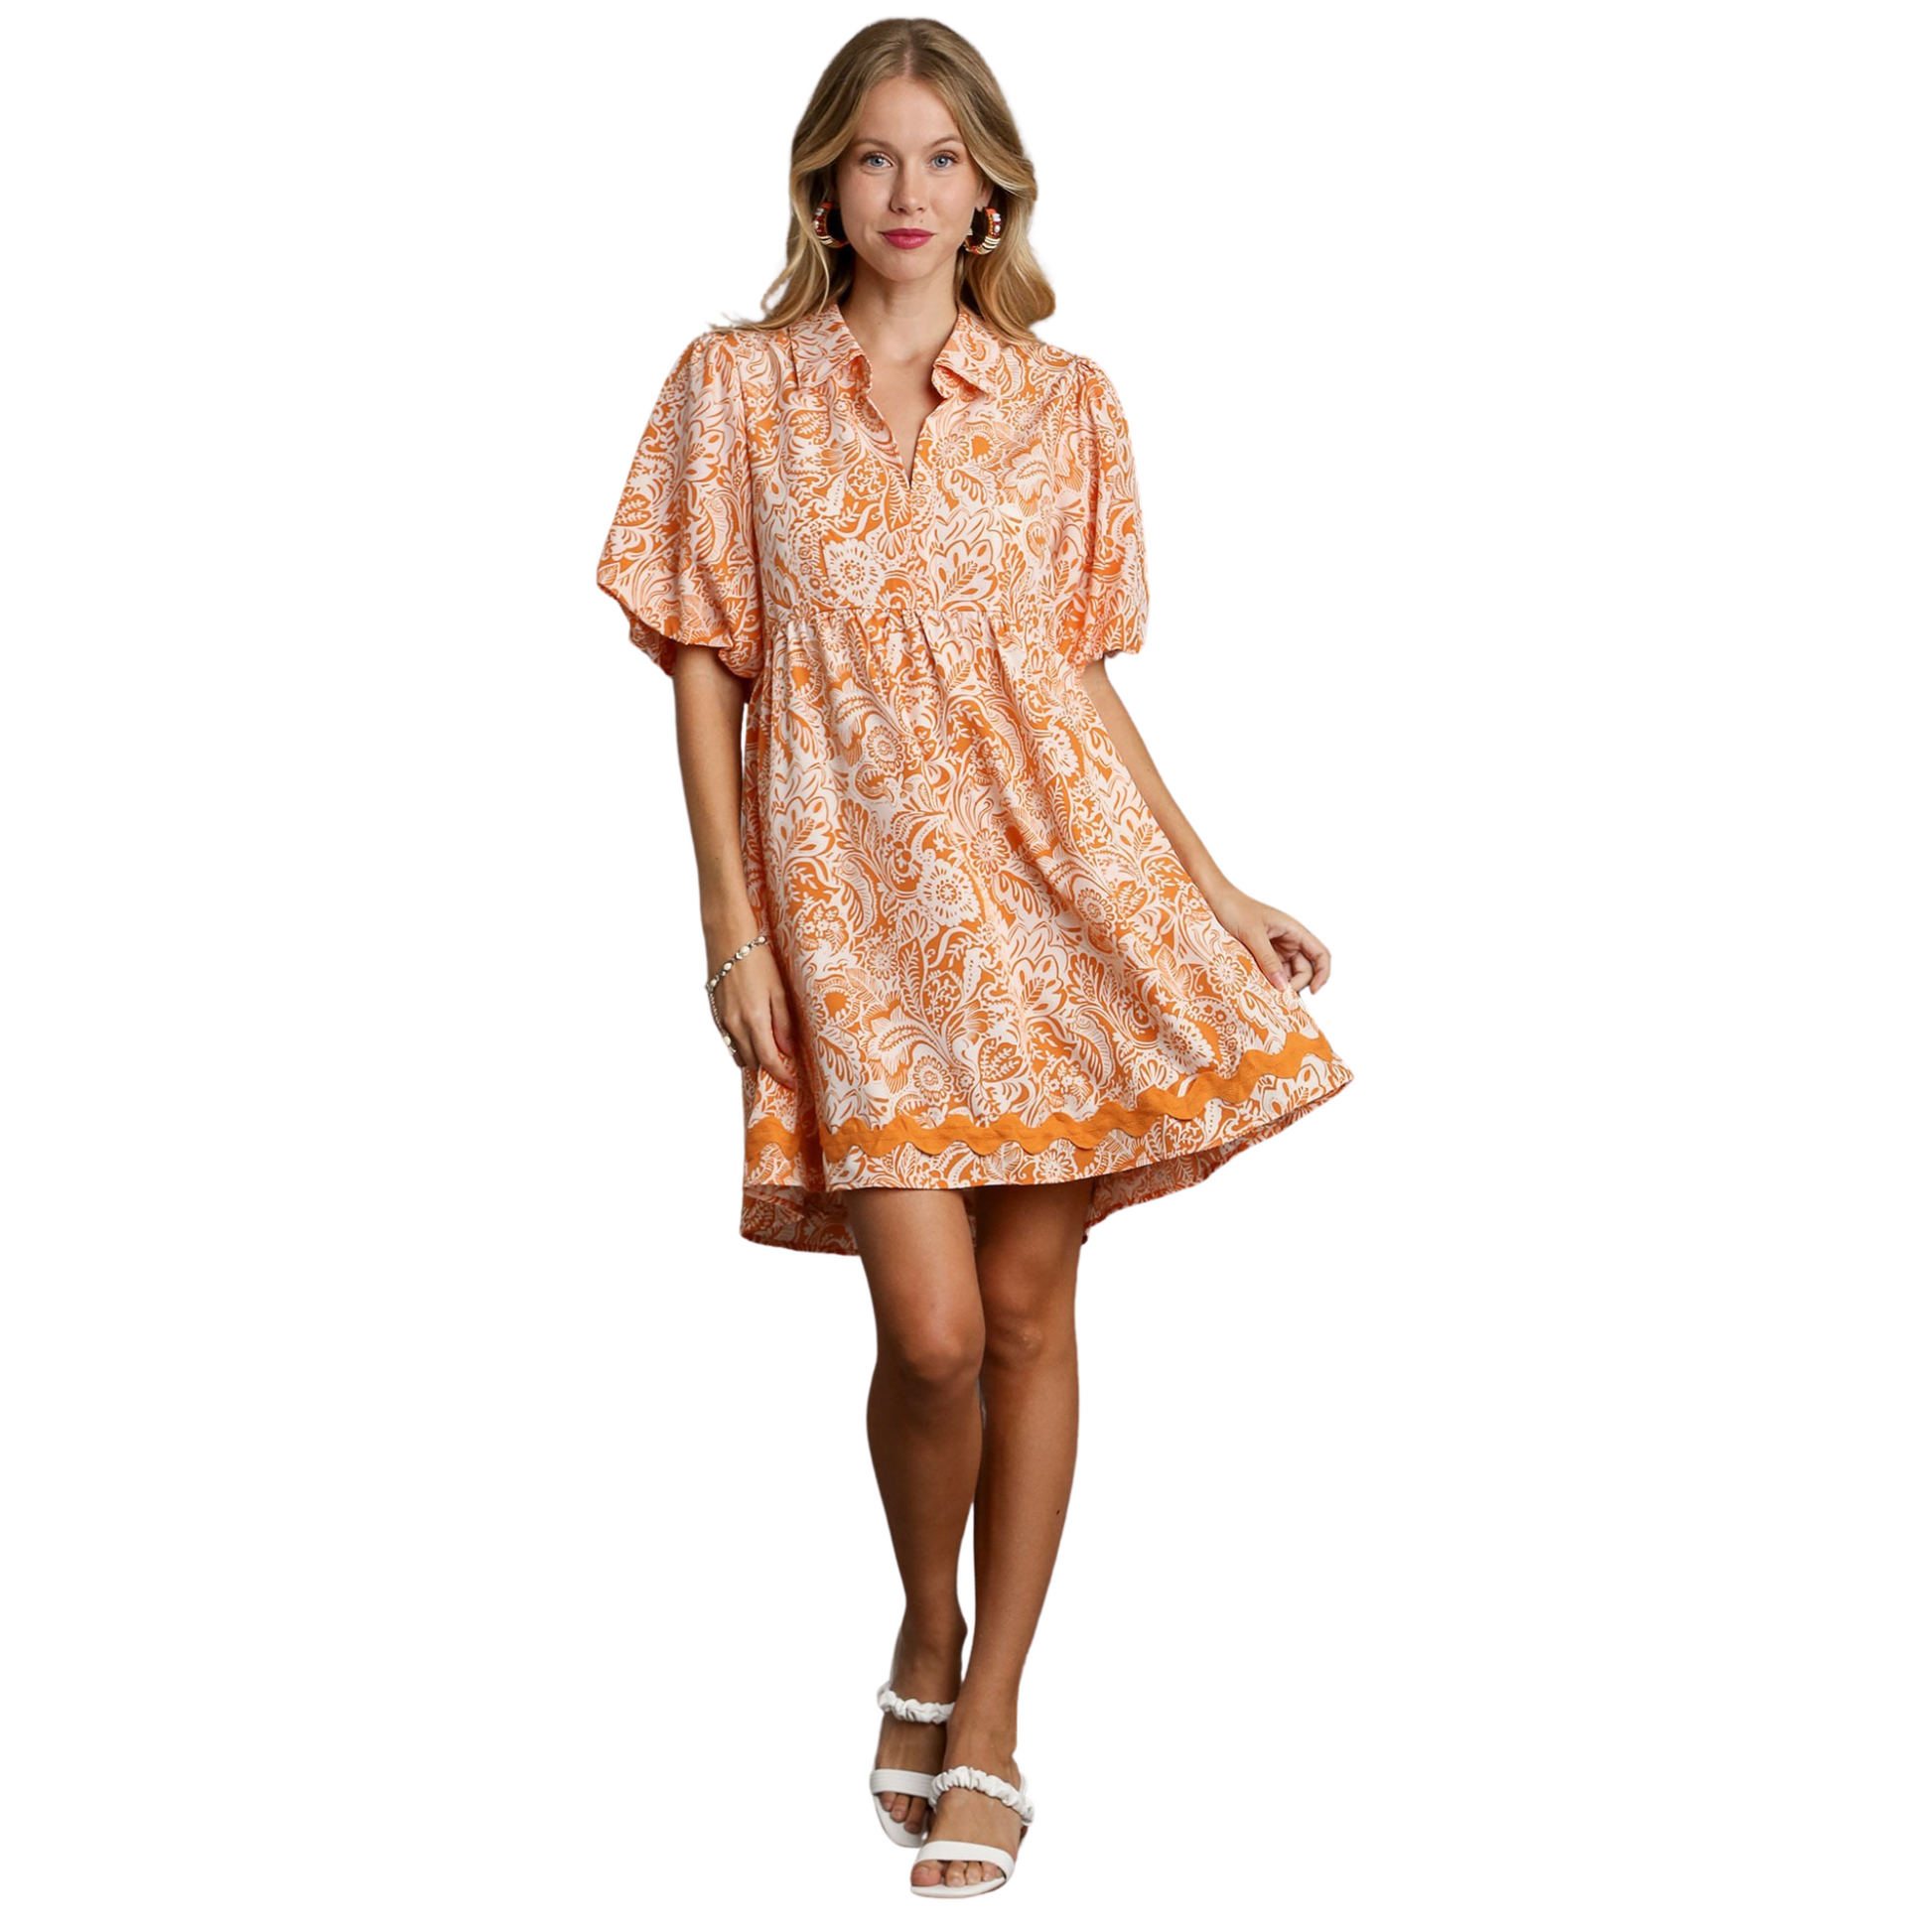 This two tone balloon sleeve dress is the perfect addition to your wardrobe. The orange and white colors create a striking contrast, while the balloon sleeves add a touch of elegance. Made with high-quality materials, this mini dress is both stylish and comfortable. Elevate your outfit and make a statement with this versatile piece.